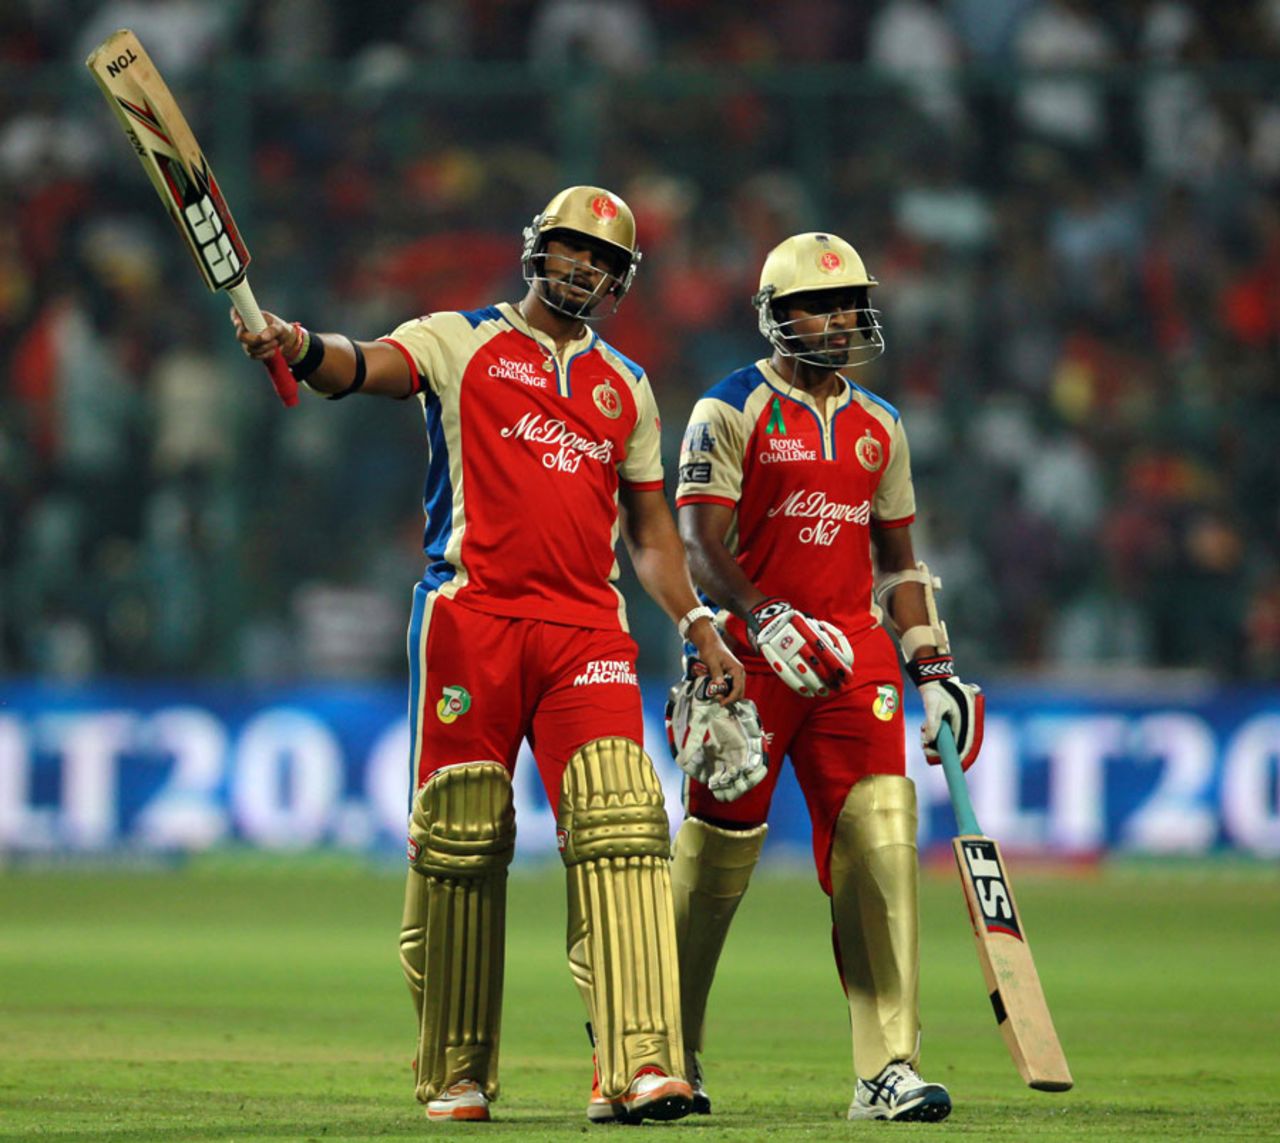 Ravi Rampaul and Vinay Kumar walk off after the match ended in a tie, Royal Challengers Bangalore v Delhi Daredevils, IPL 2013, Bangalore, April 16, 2013